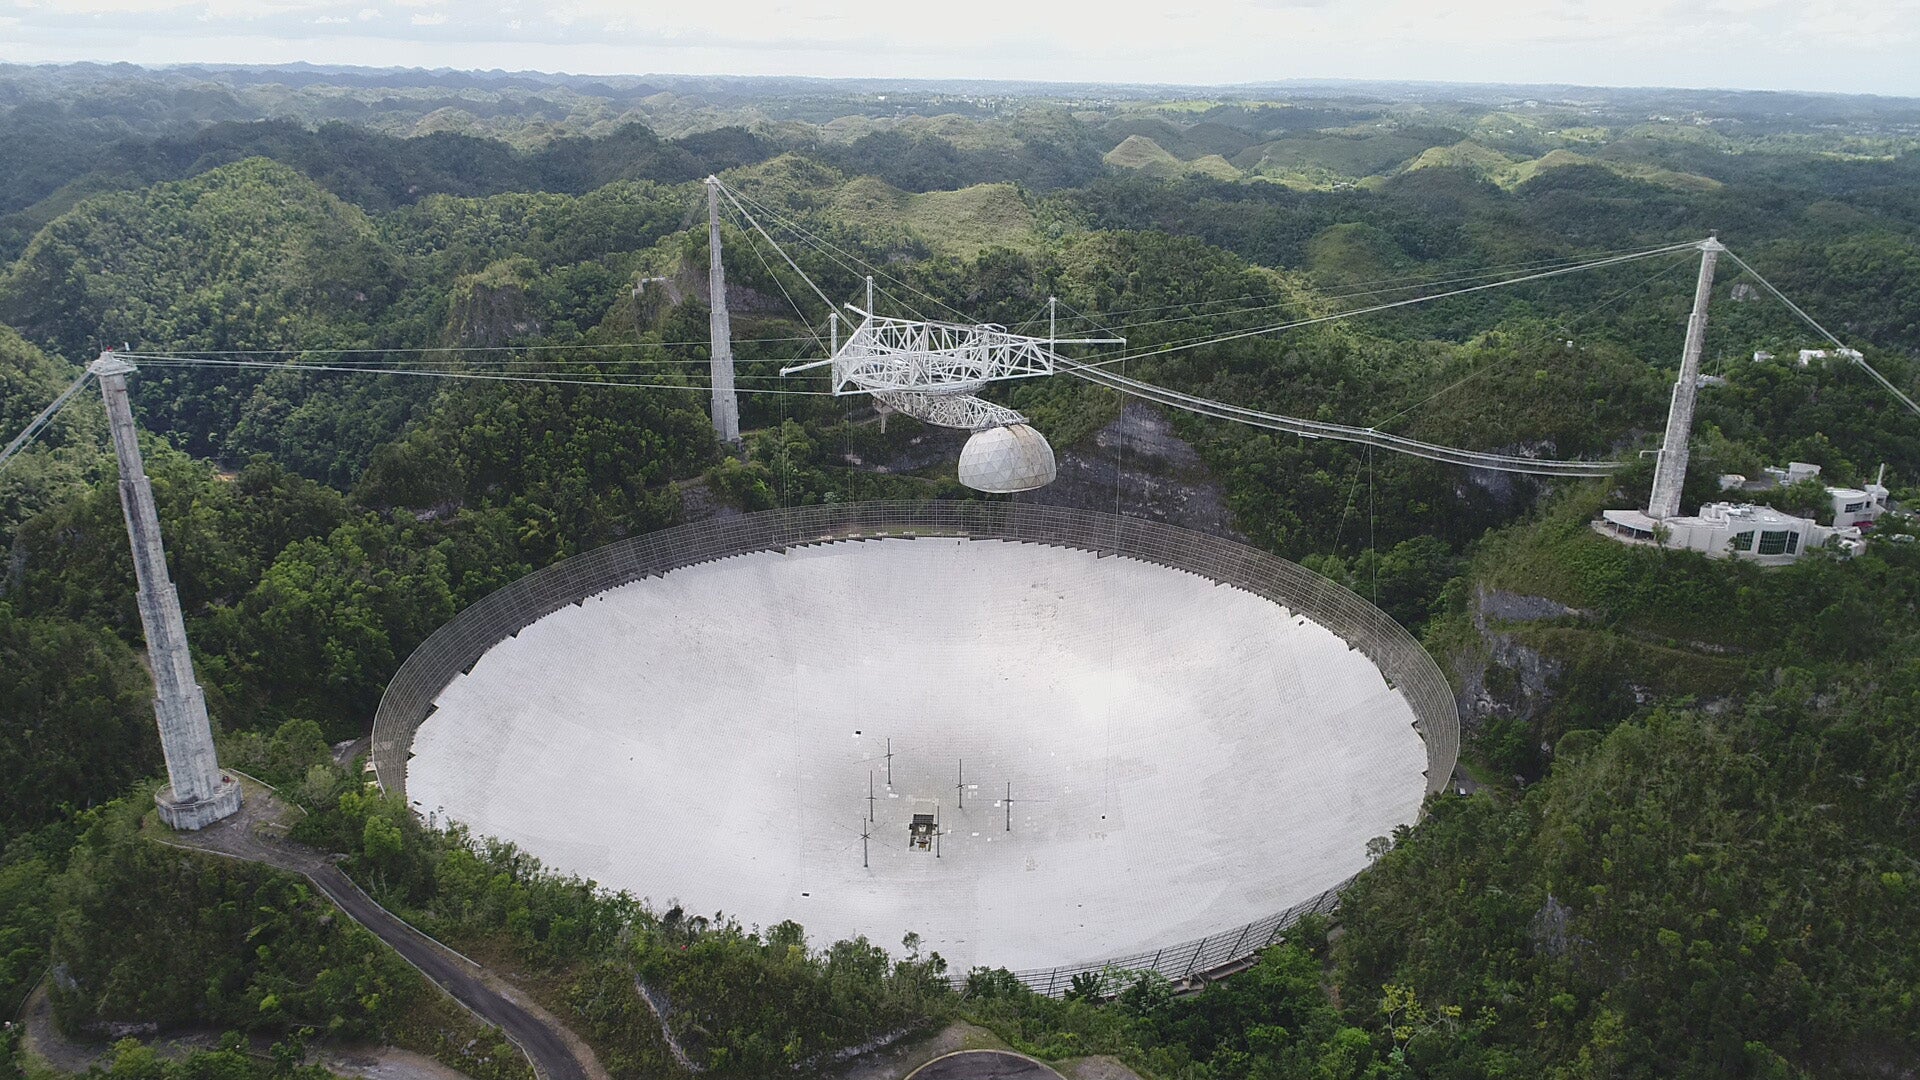 Aerial view of the Arecibo Telescope before its collapse in December 2020.